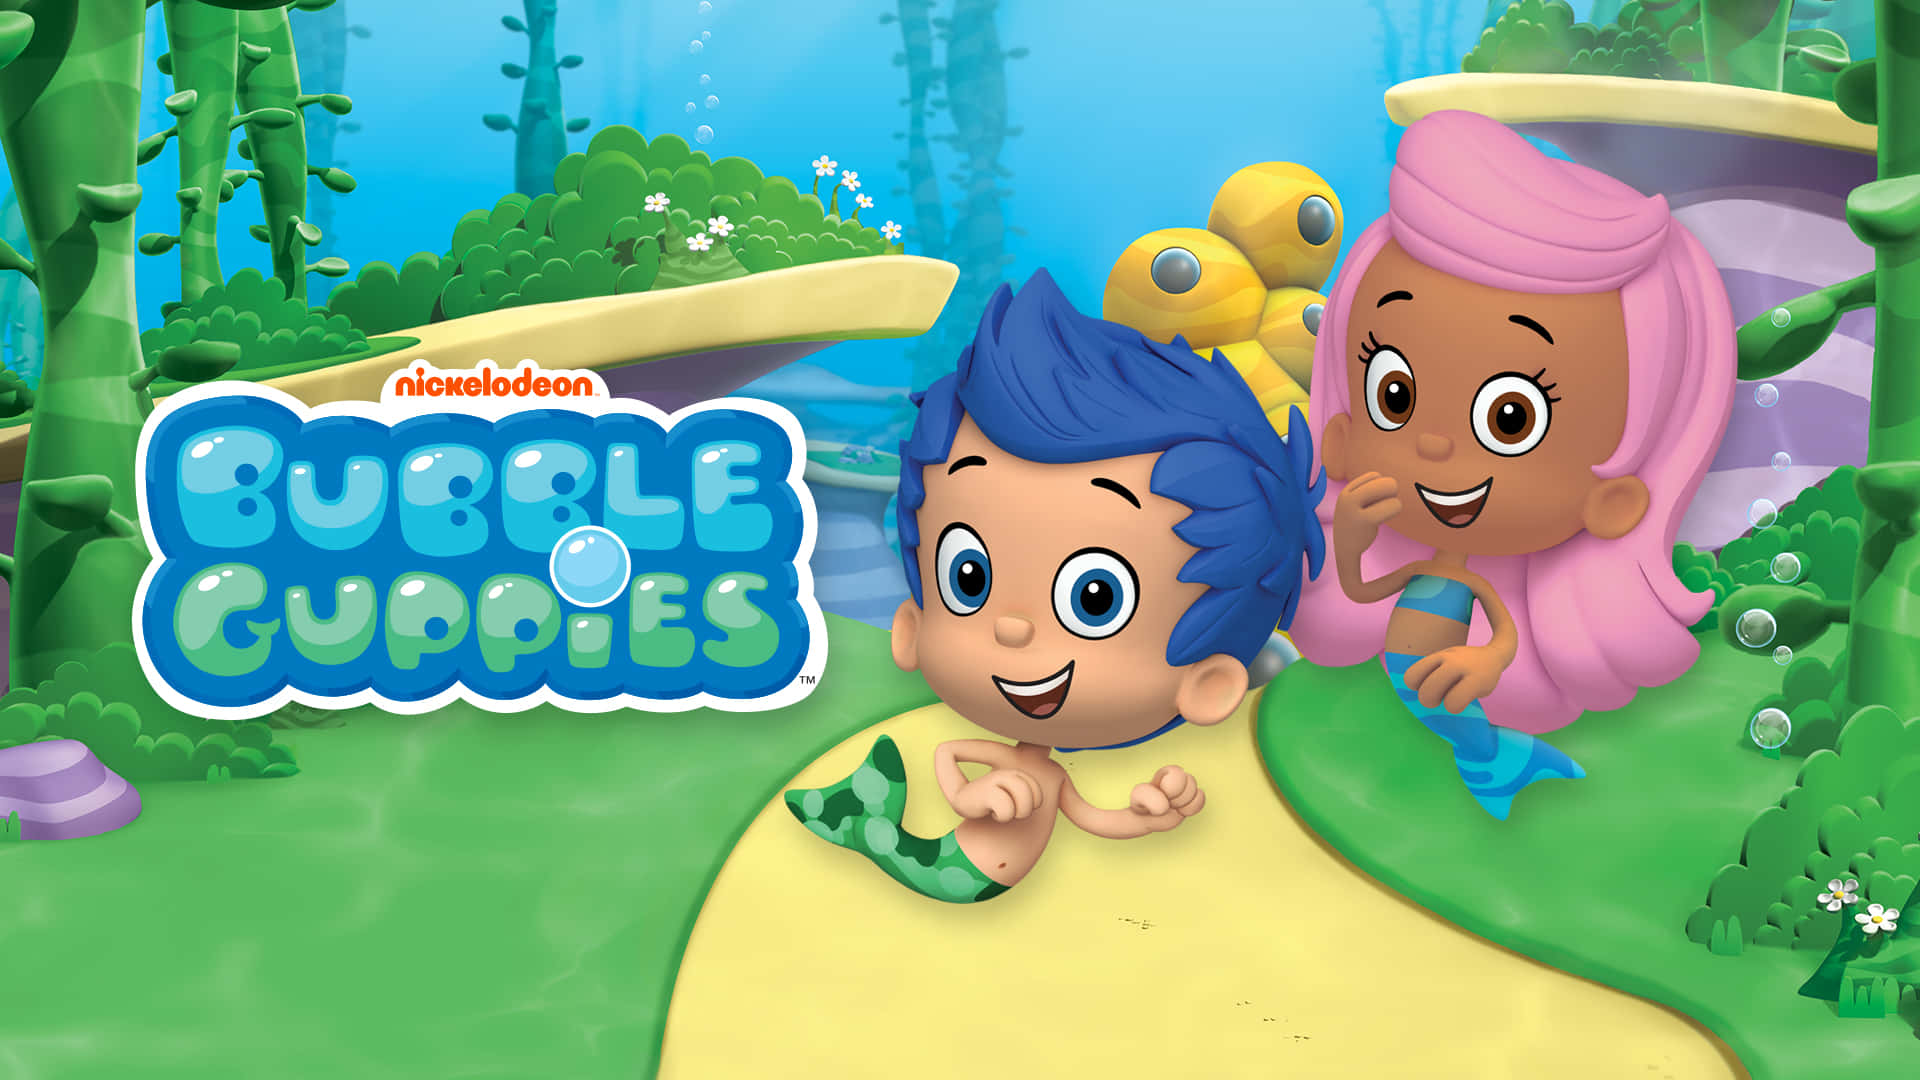 Fun Times with Bubble Guppies